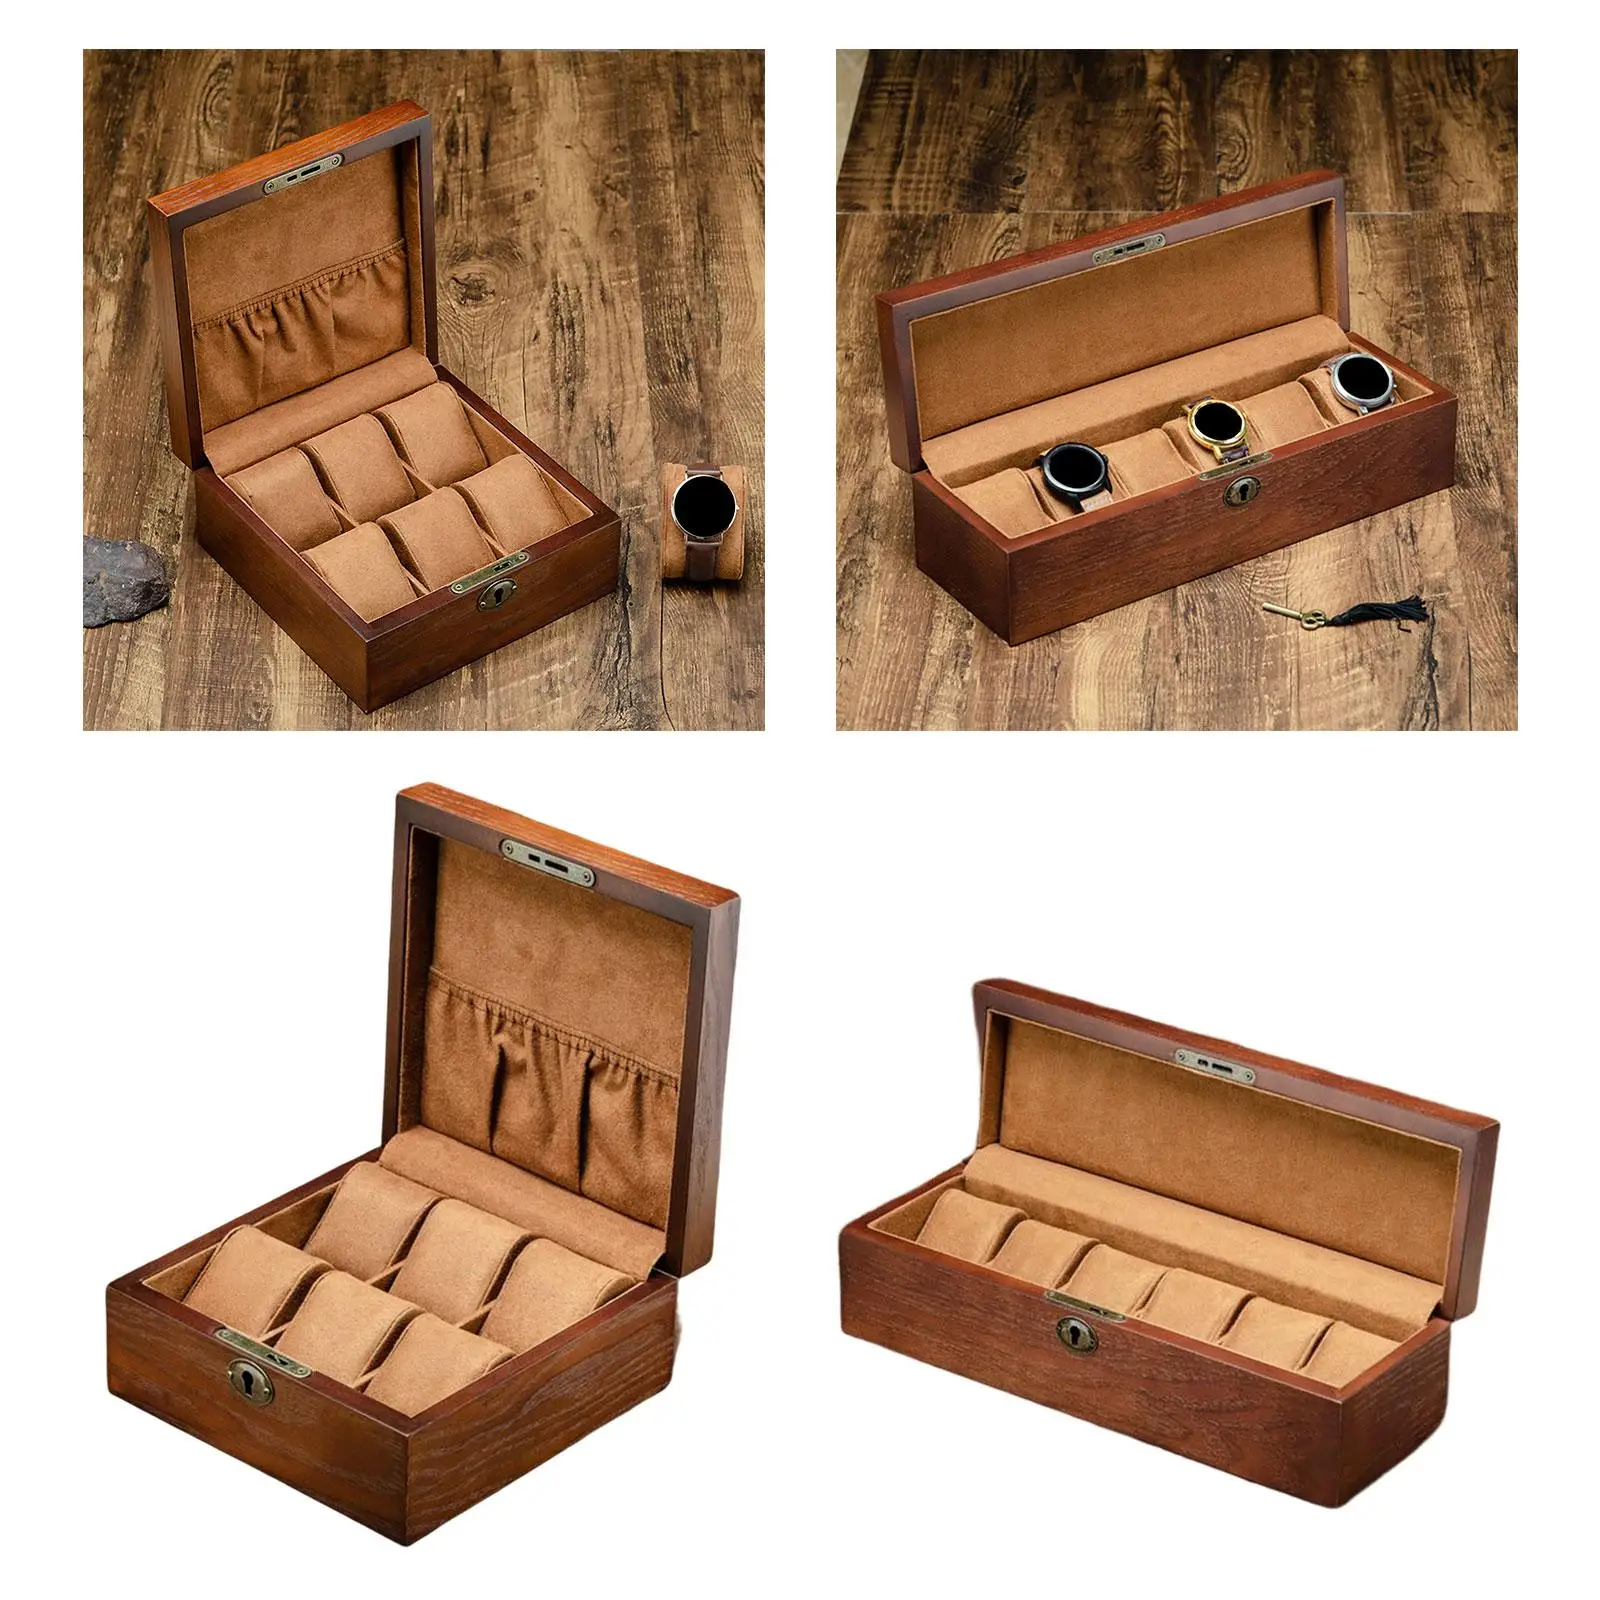 Luxury 6 Slot Wood Watch Box with Removable Pillows Watch Bracelet Display Watch Display case Organizer Birthday Gift